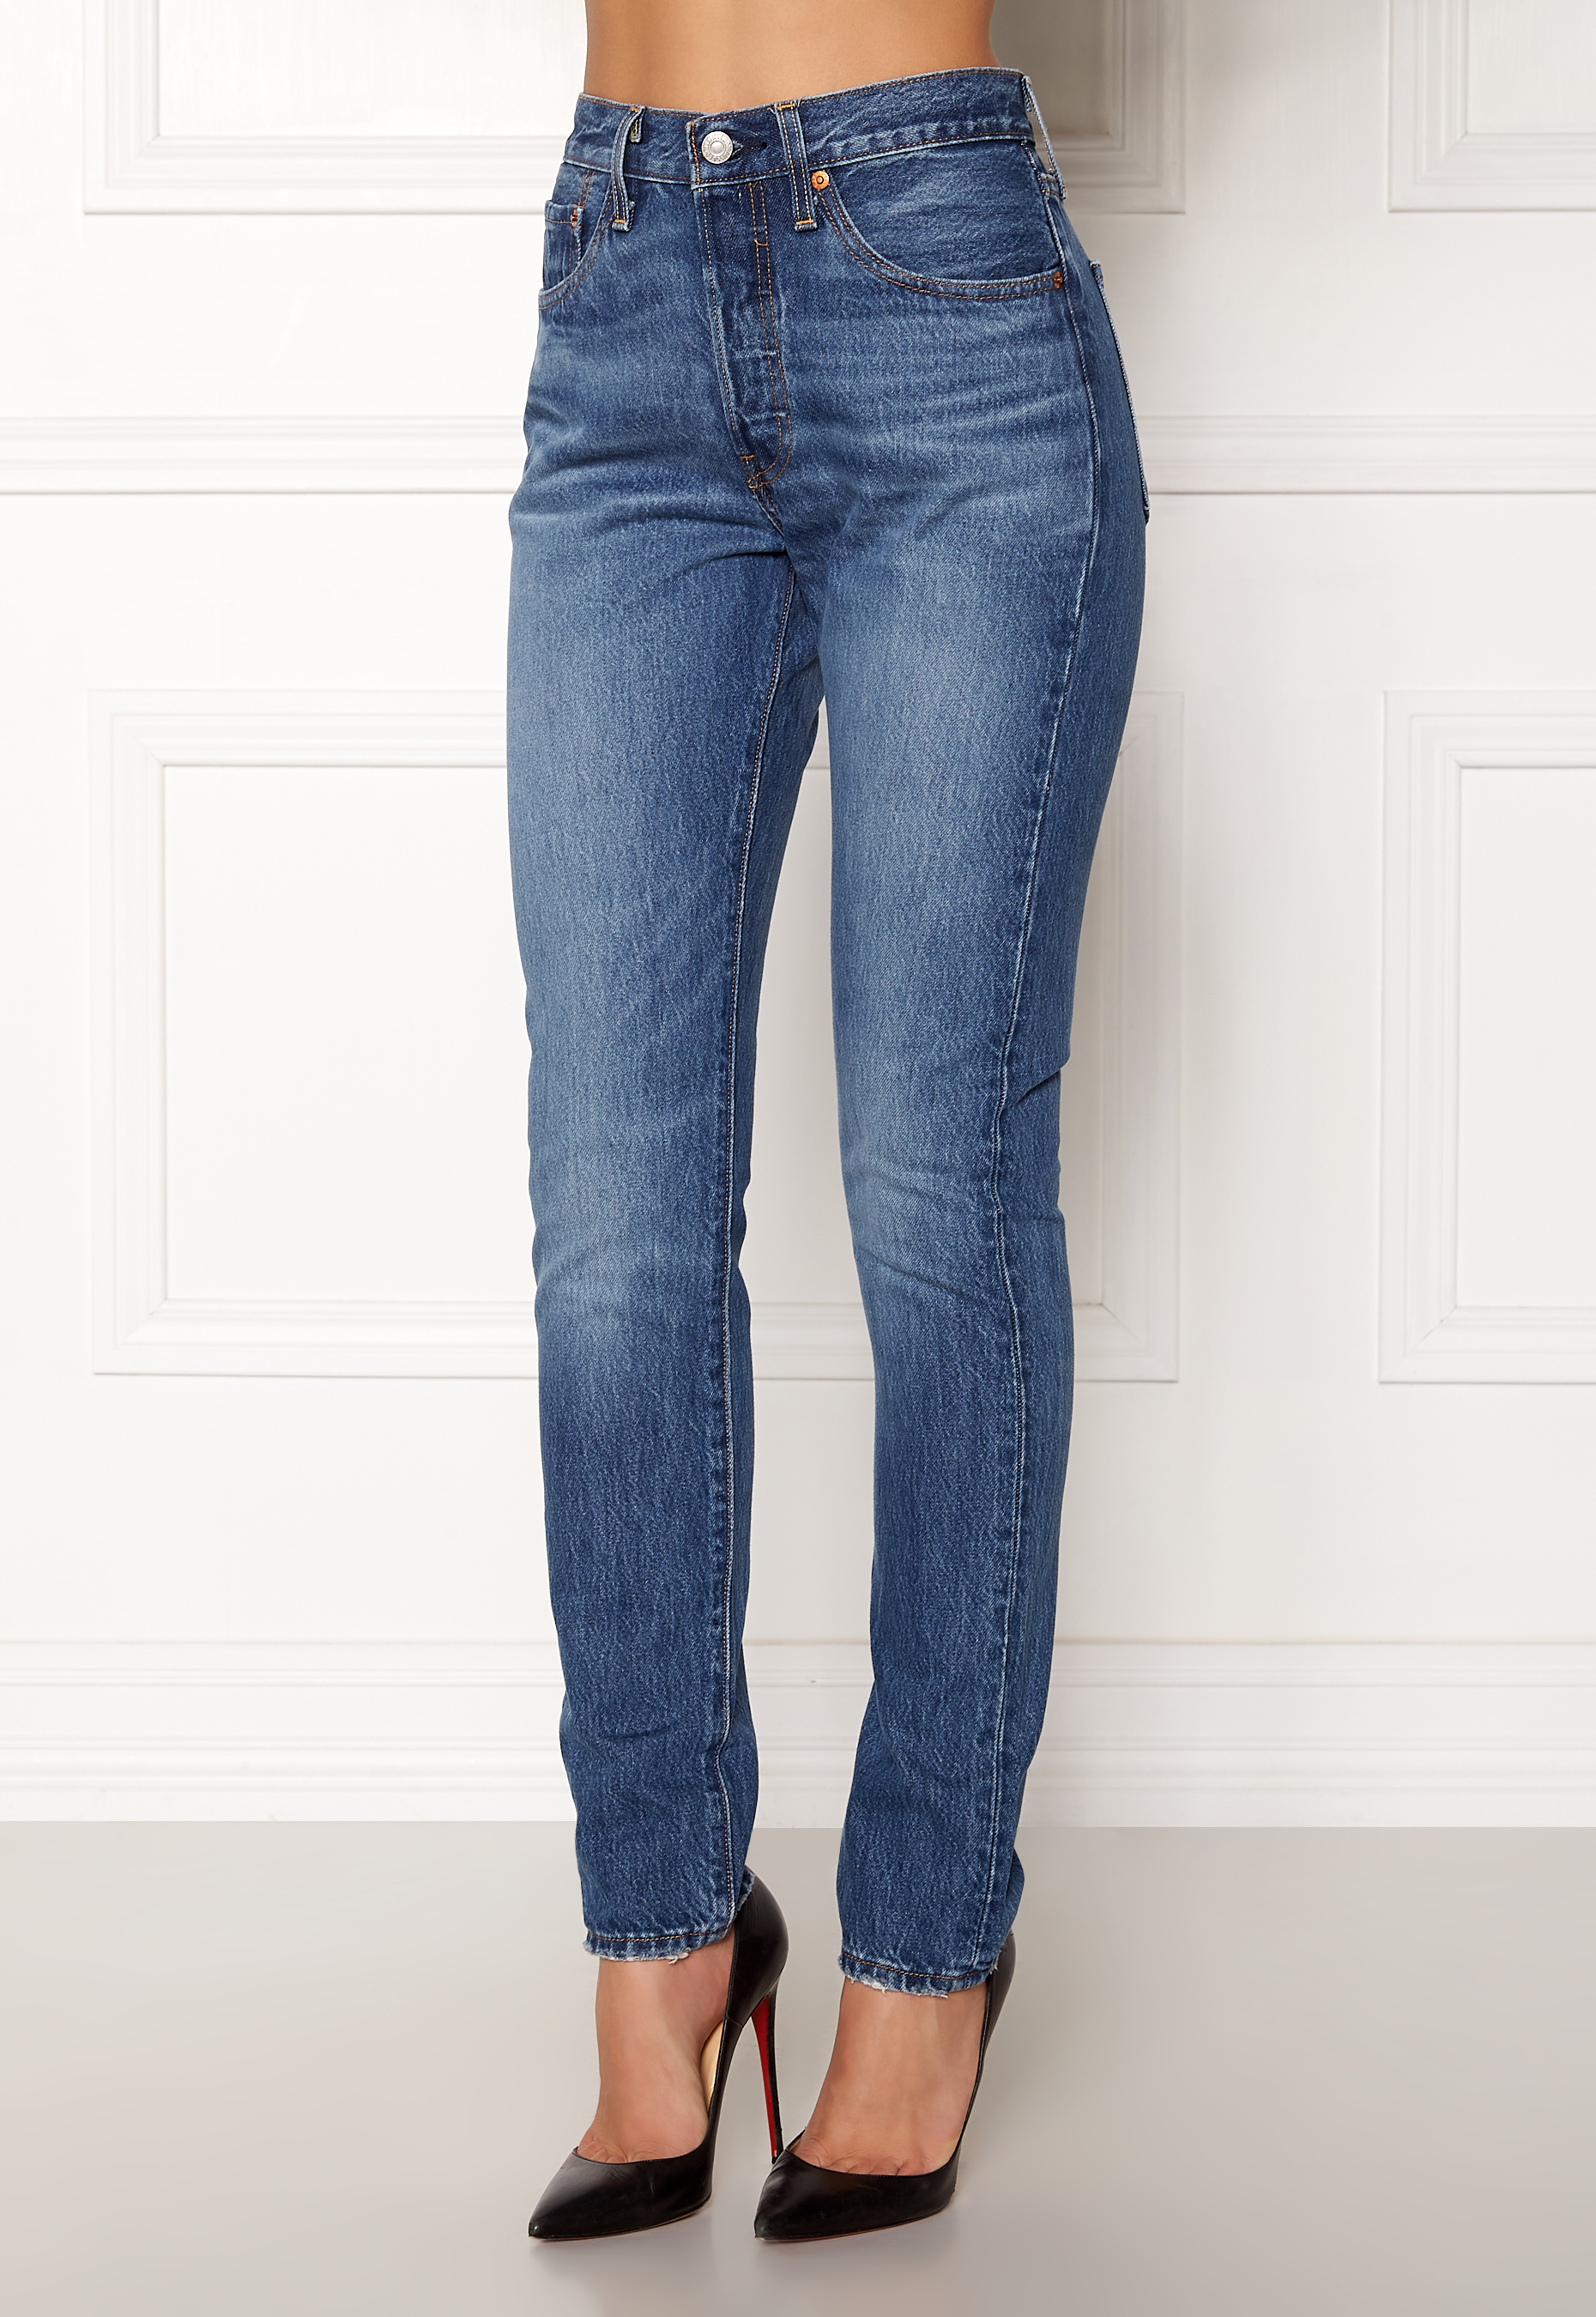 LEVI'S 501 Skinny Jeans 0057 Chill Pill 